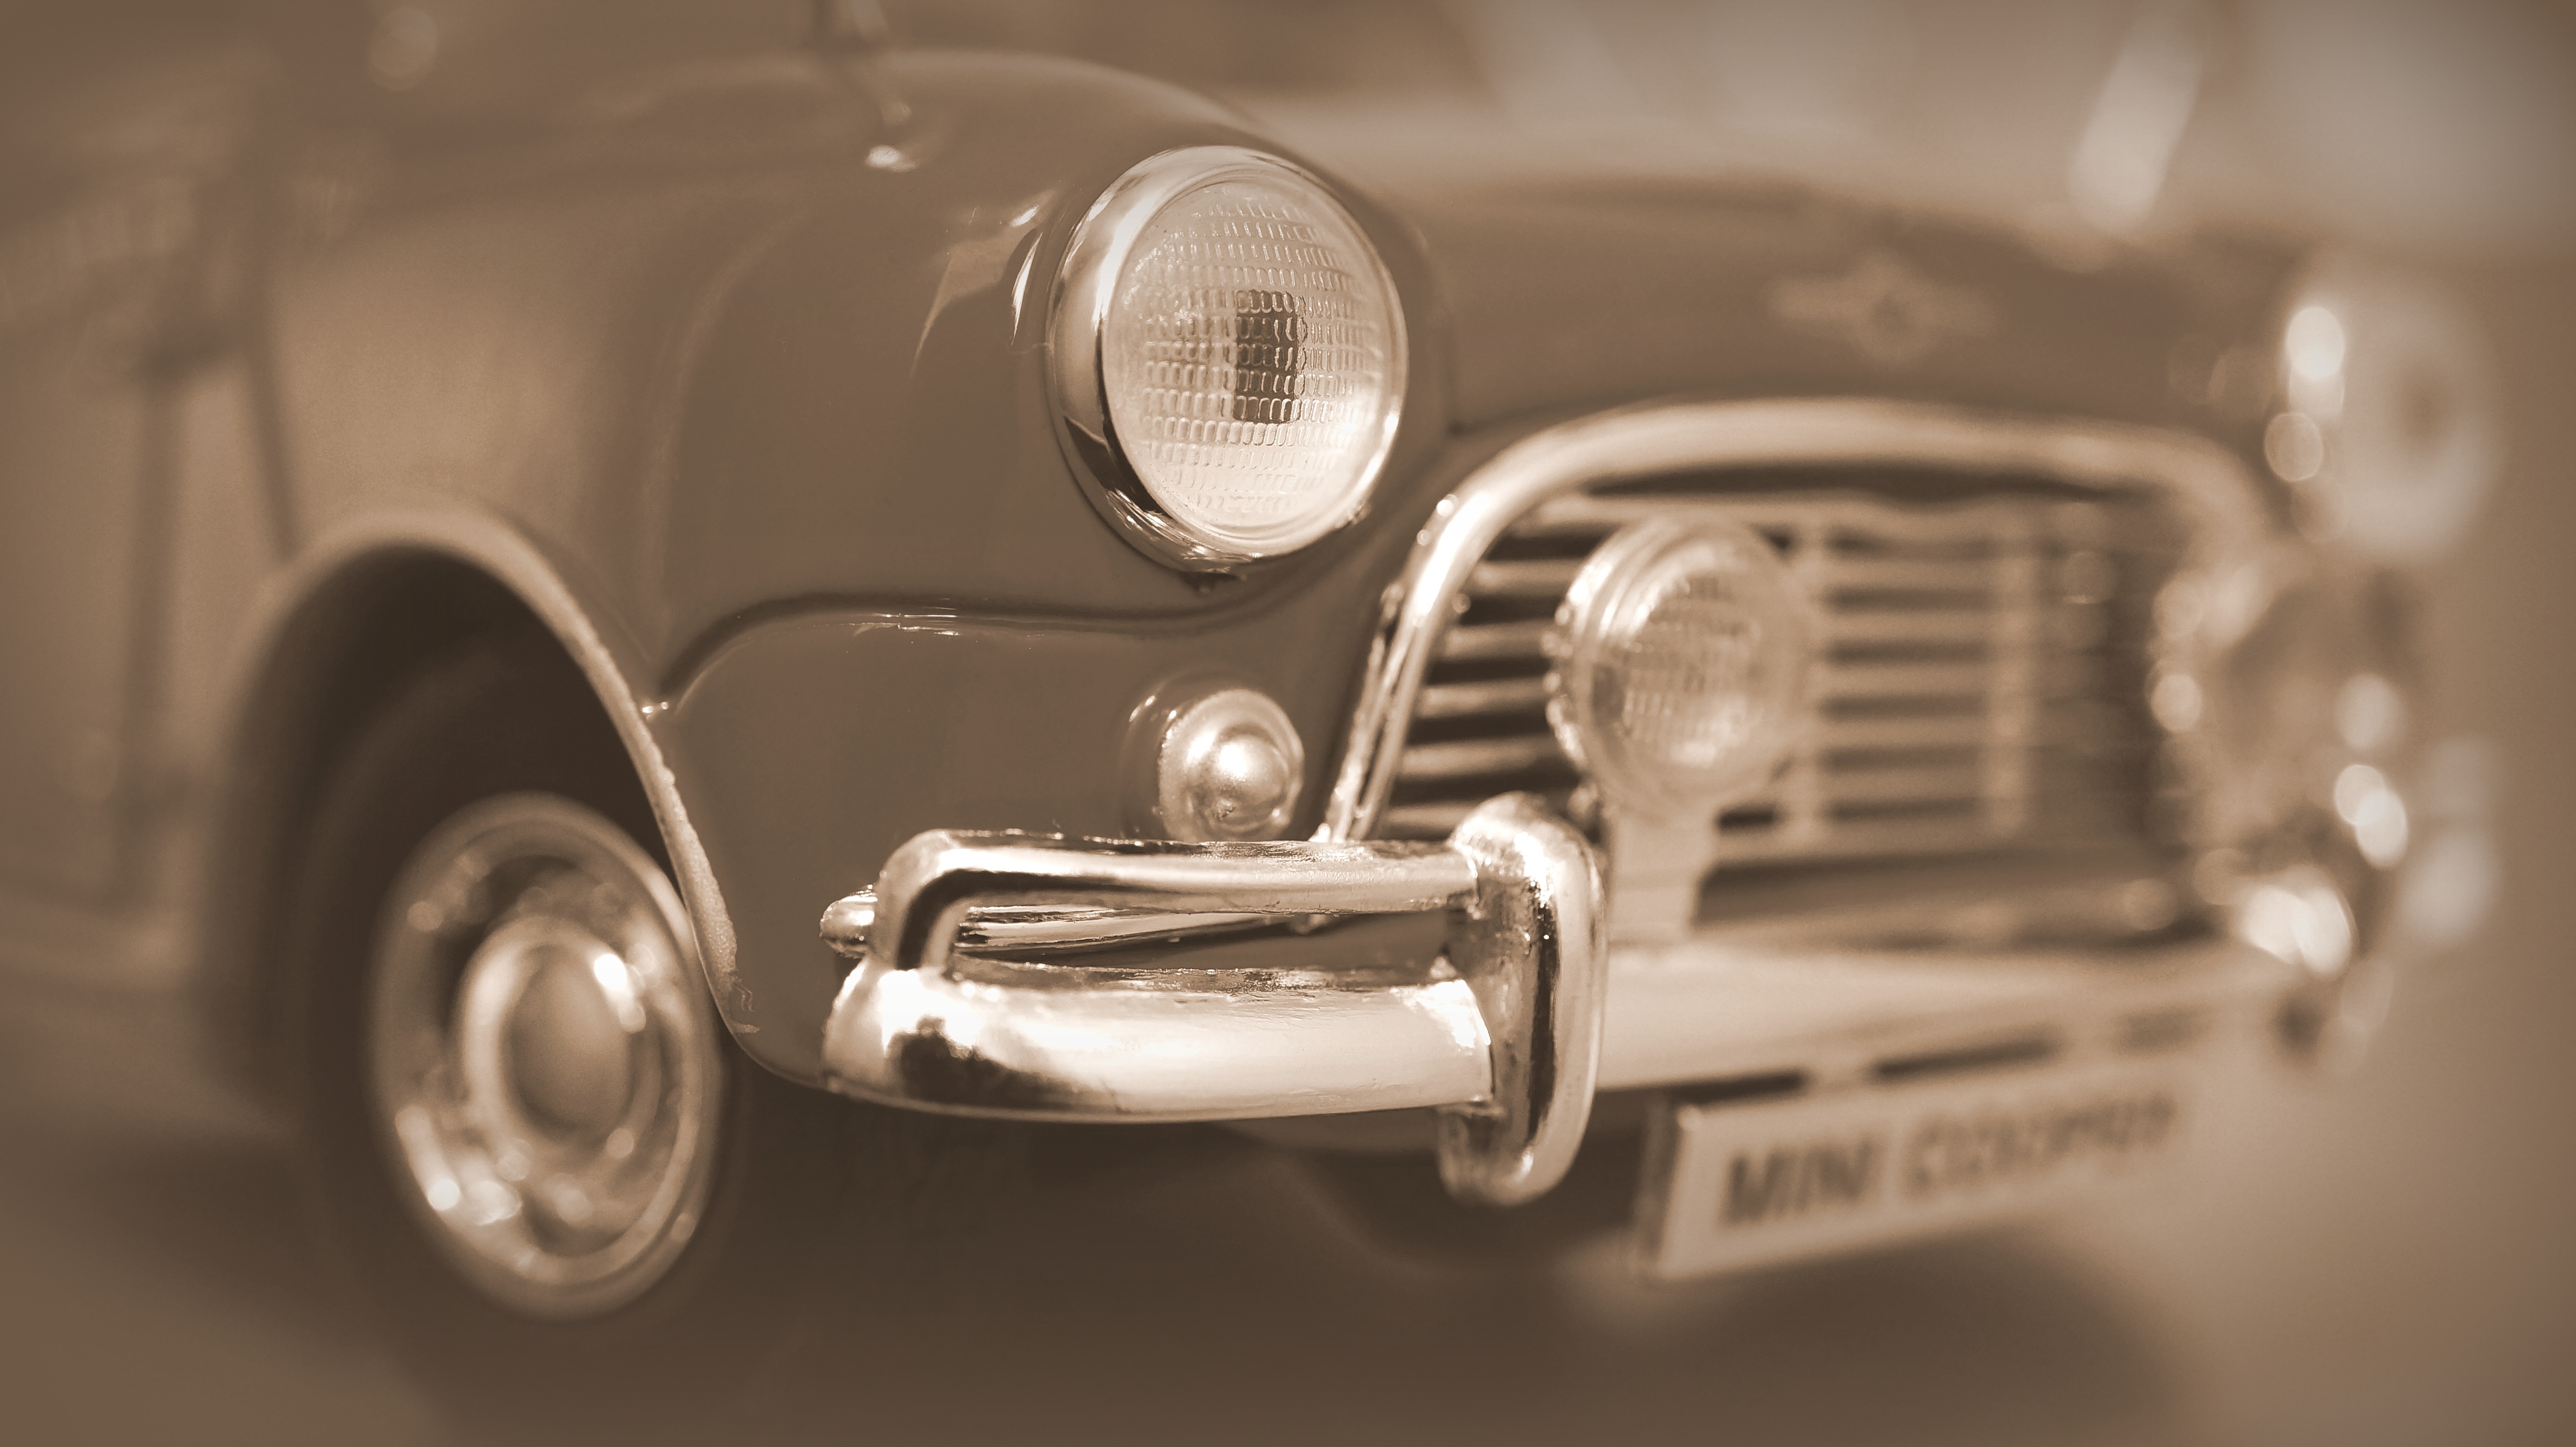 Mini, Car, Old Cars, Toy, Model, Vehicle, music, old-fashioned